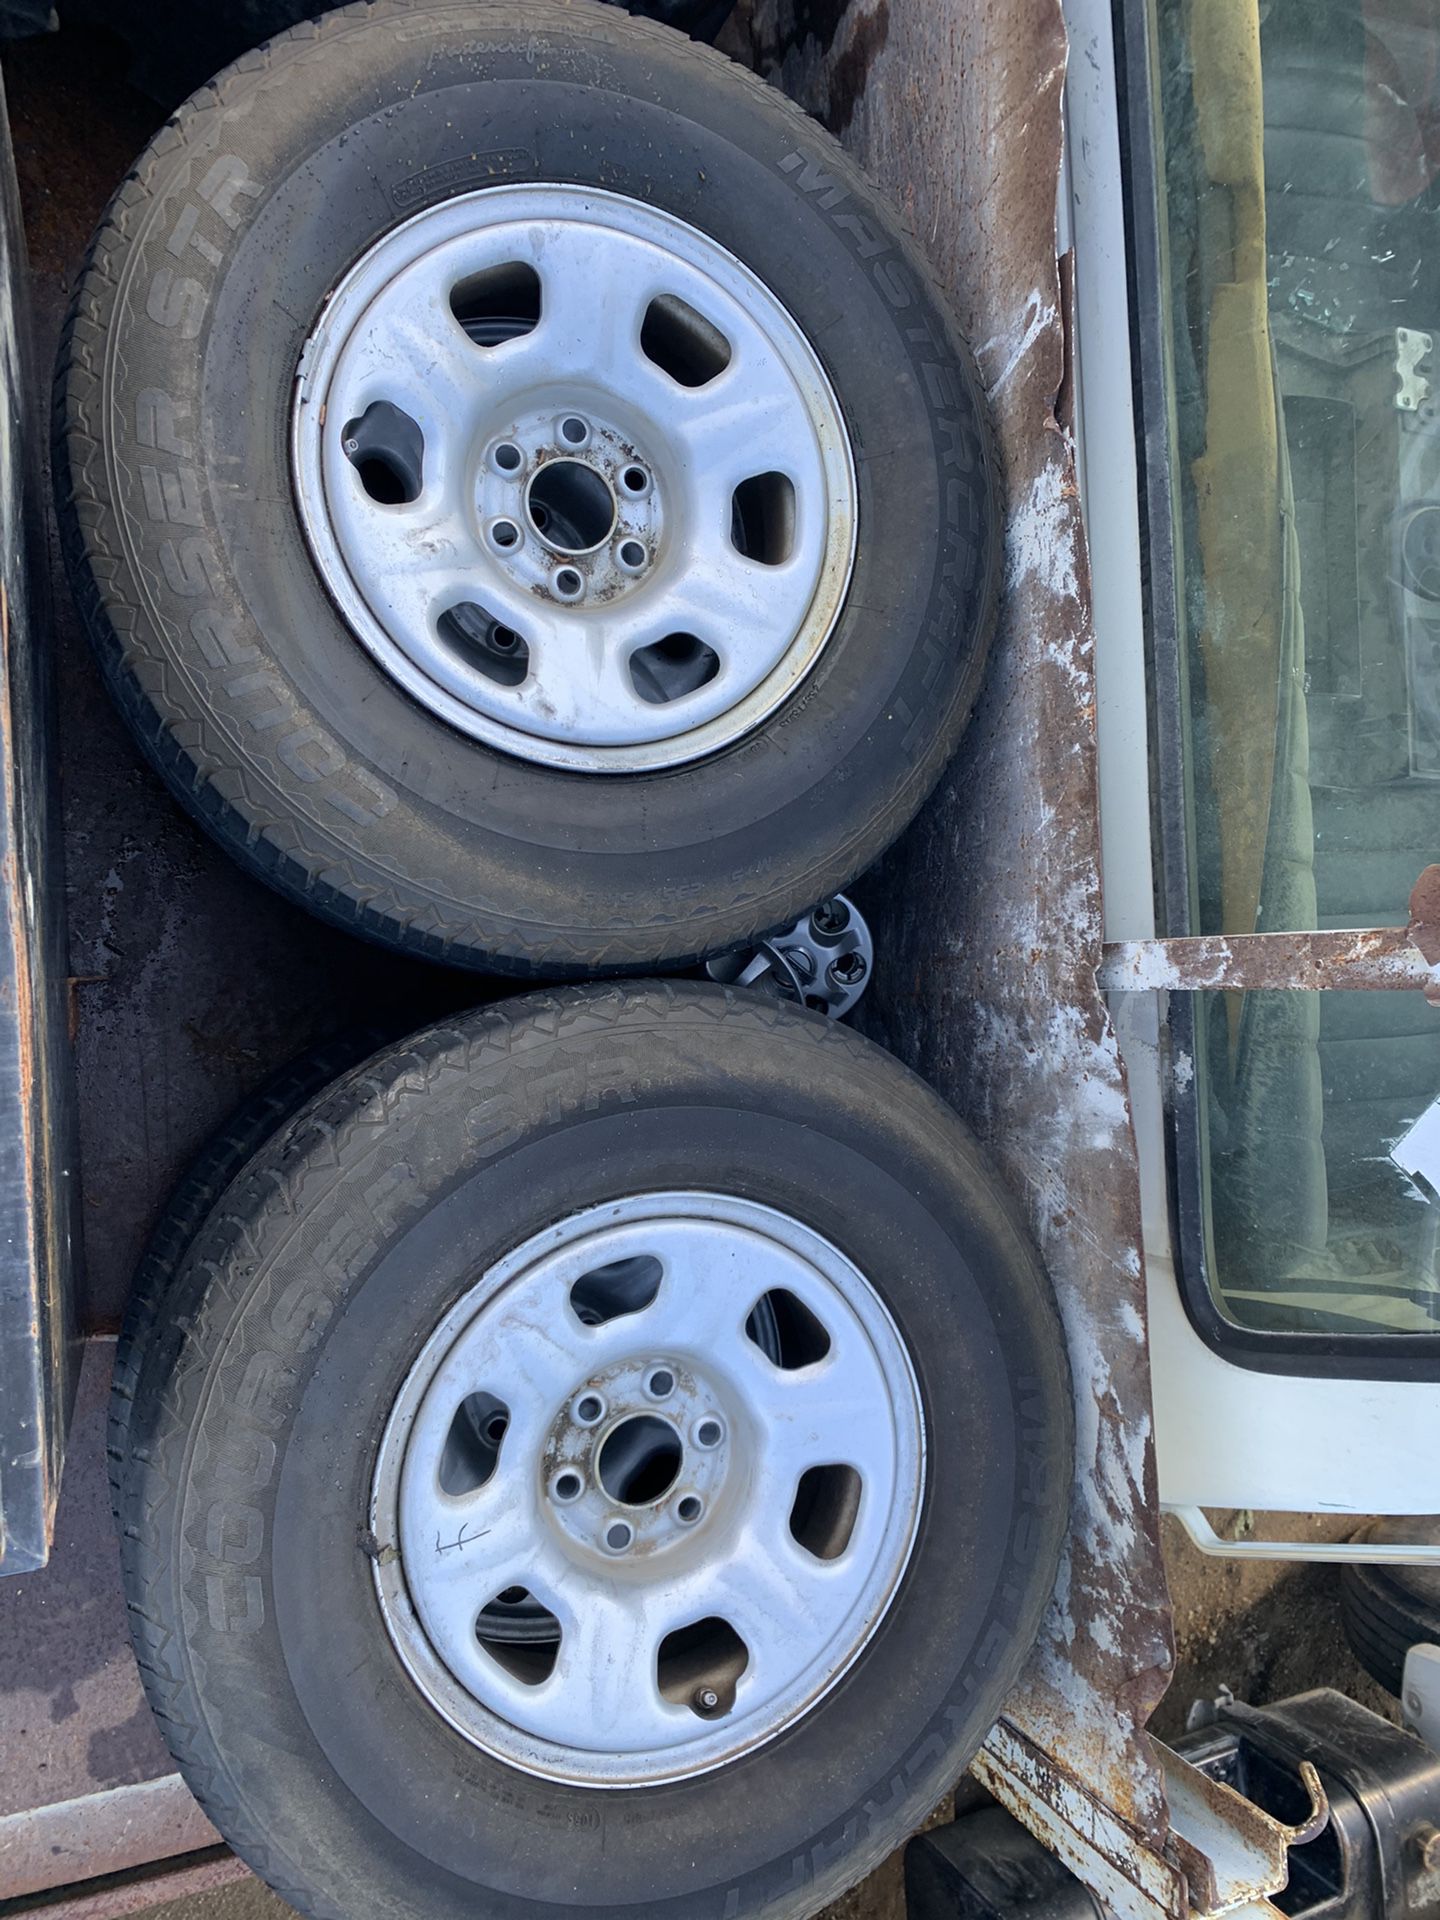 2006-Nissan Frontier rims, caps and tires